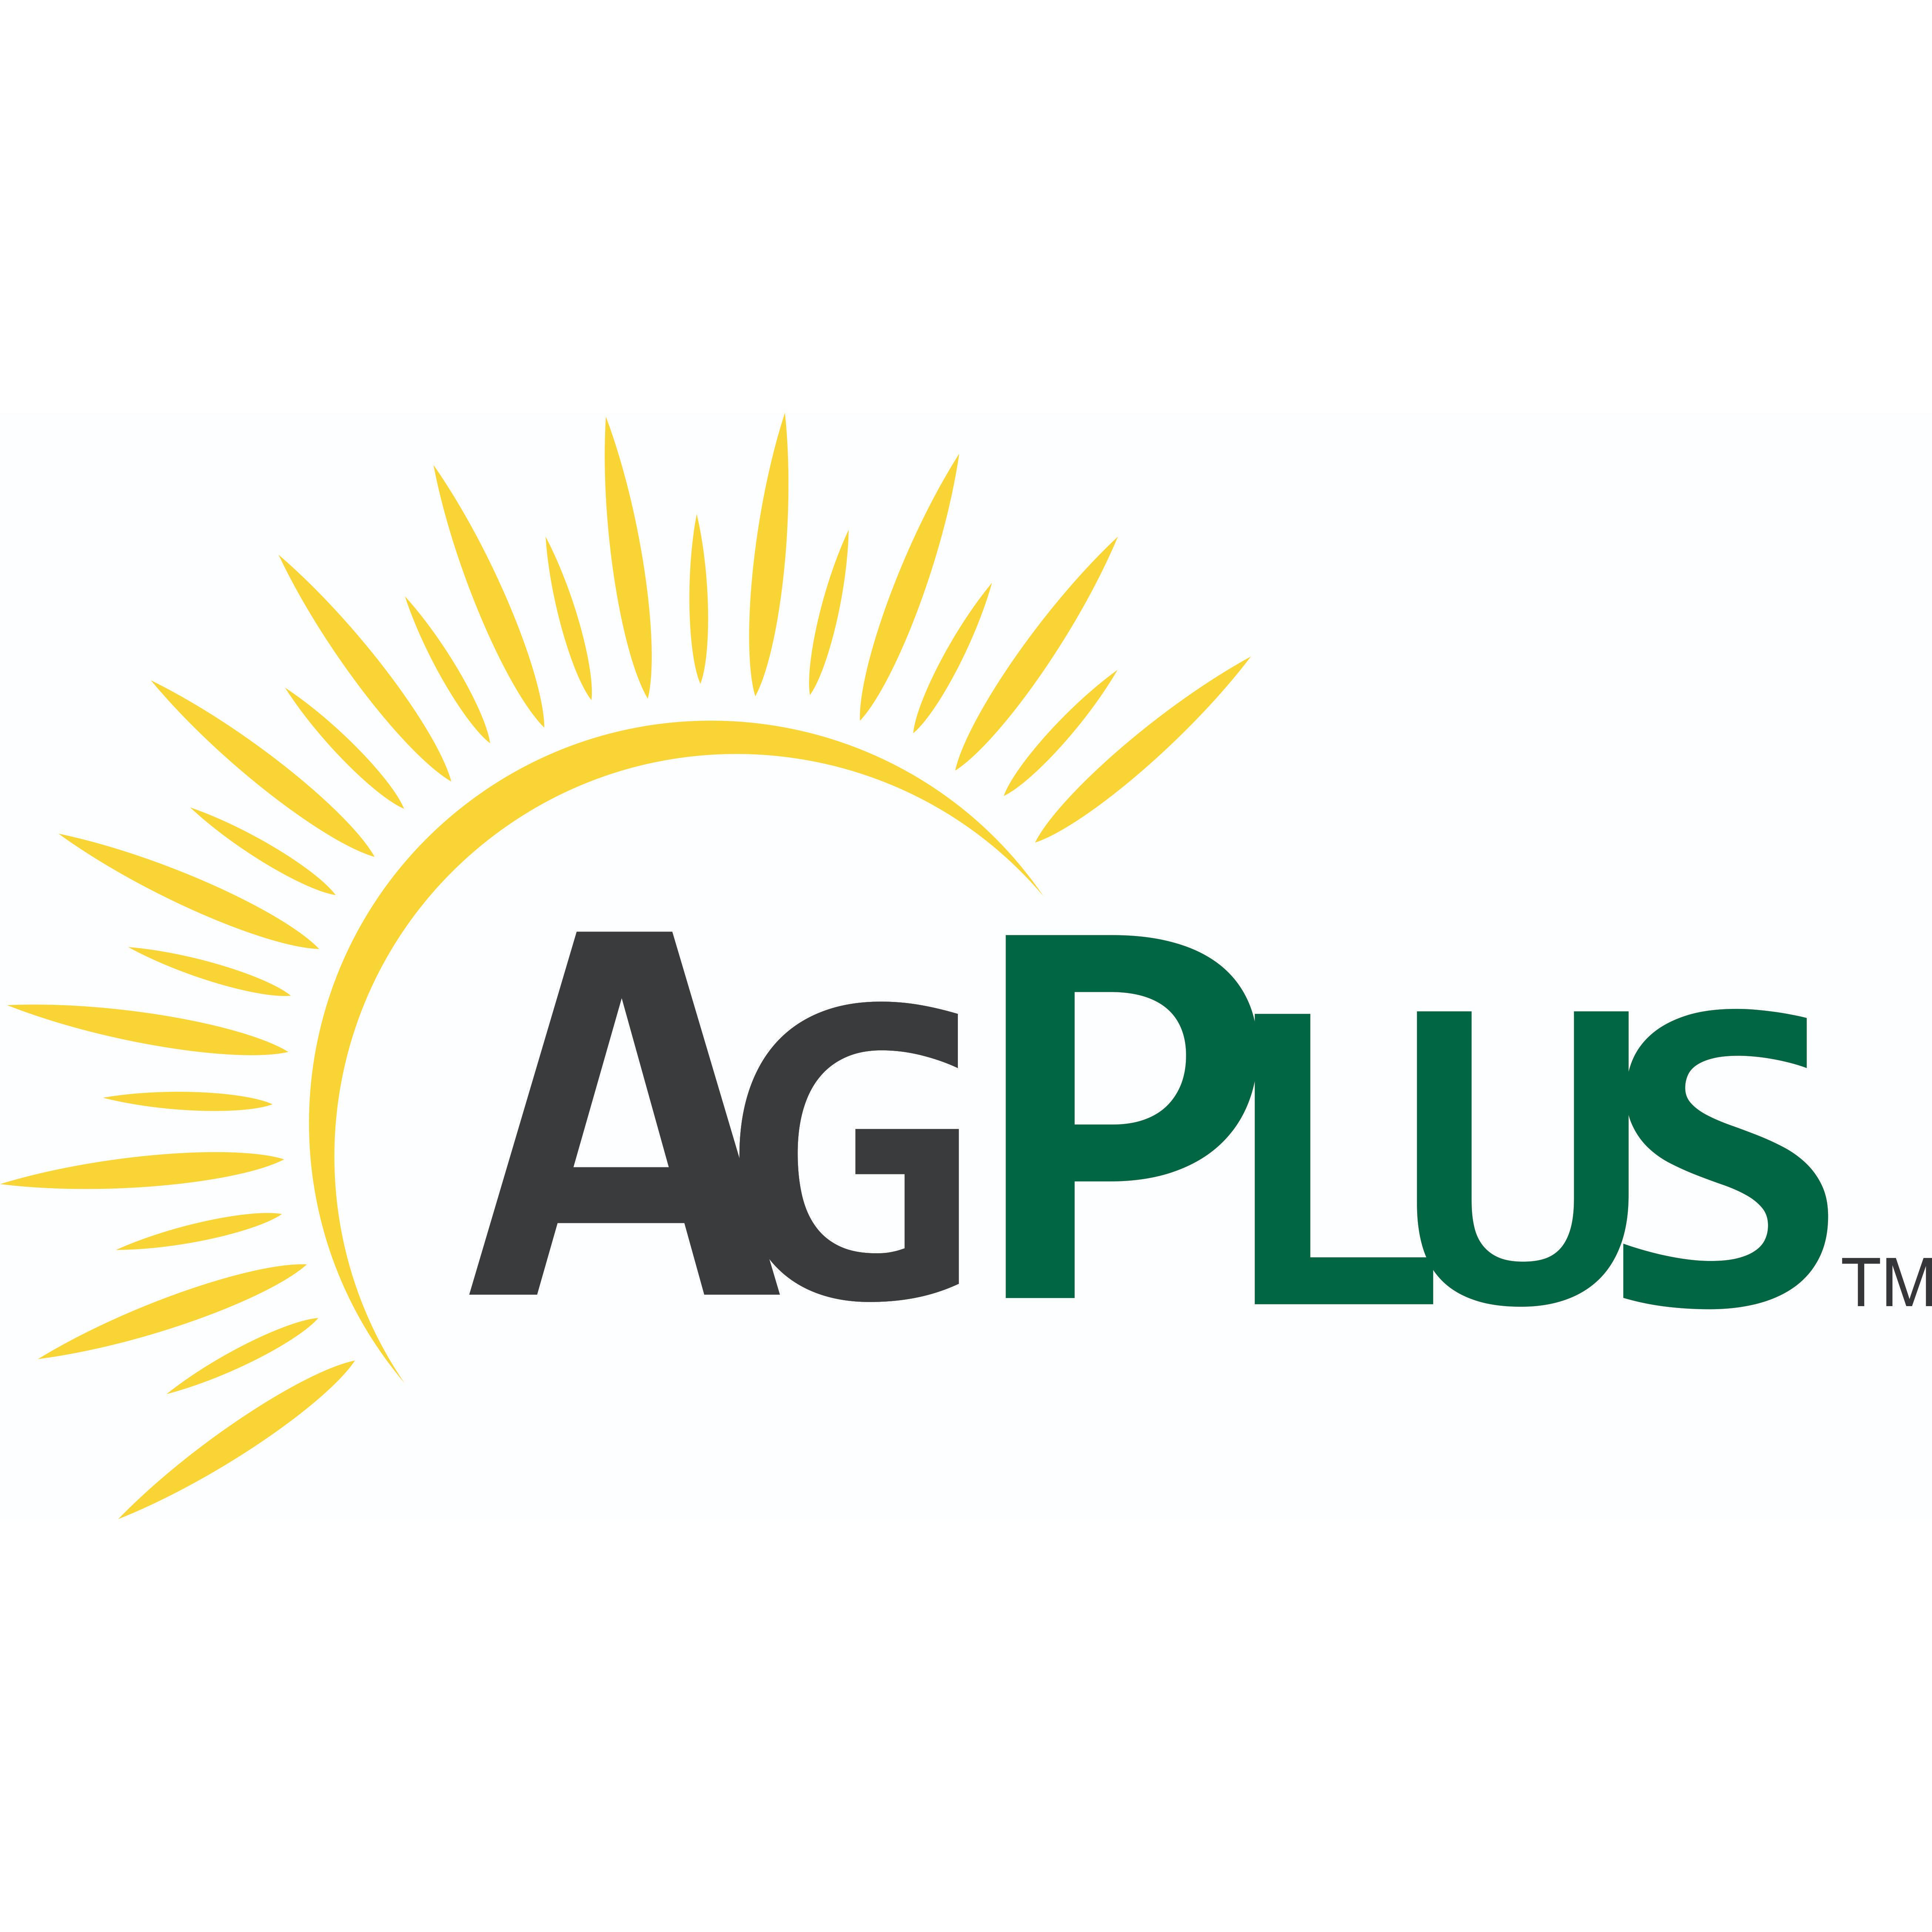 Ag Plus Cooperative - Marshall, MN 56258 - (507)532-9686 | ShowMeLocal.com